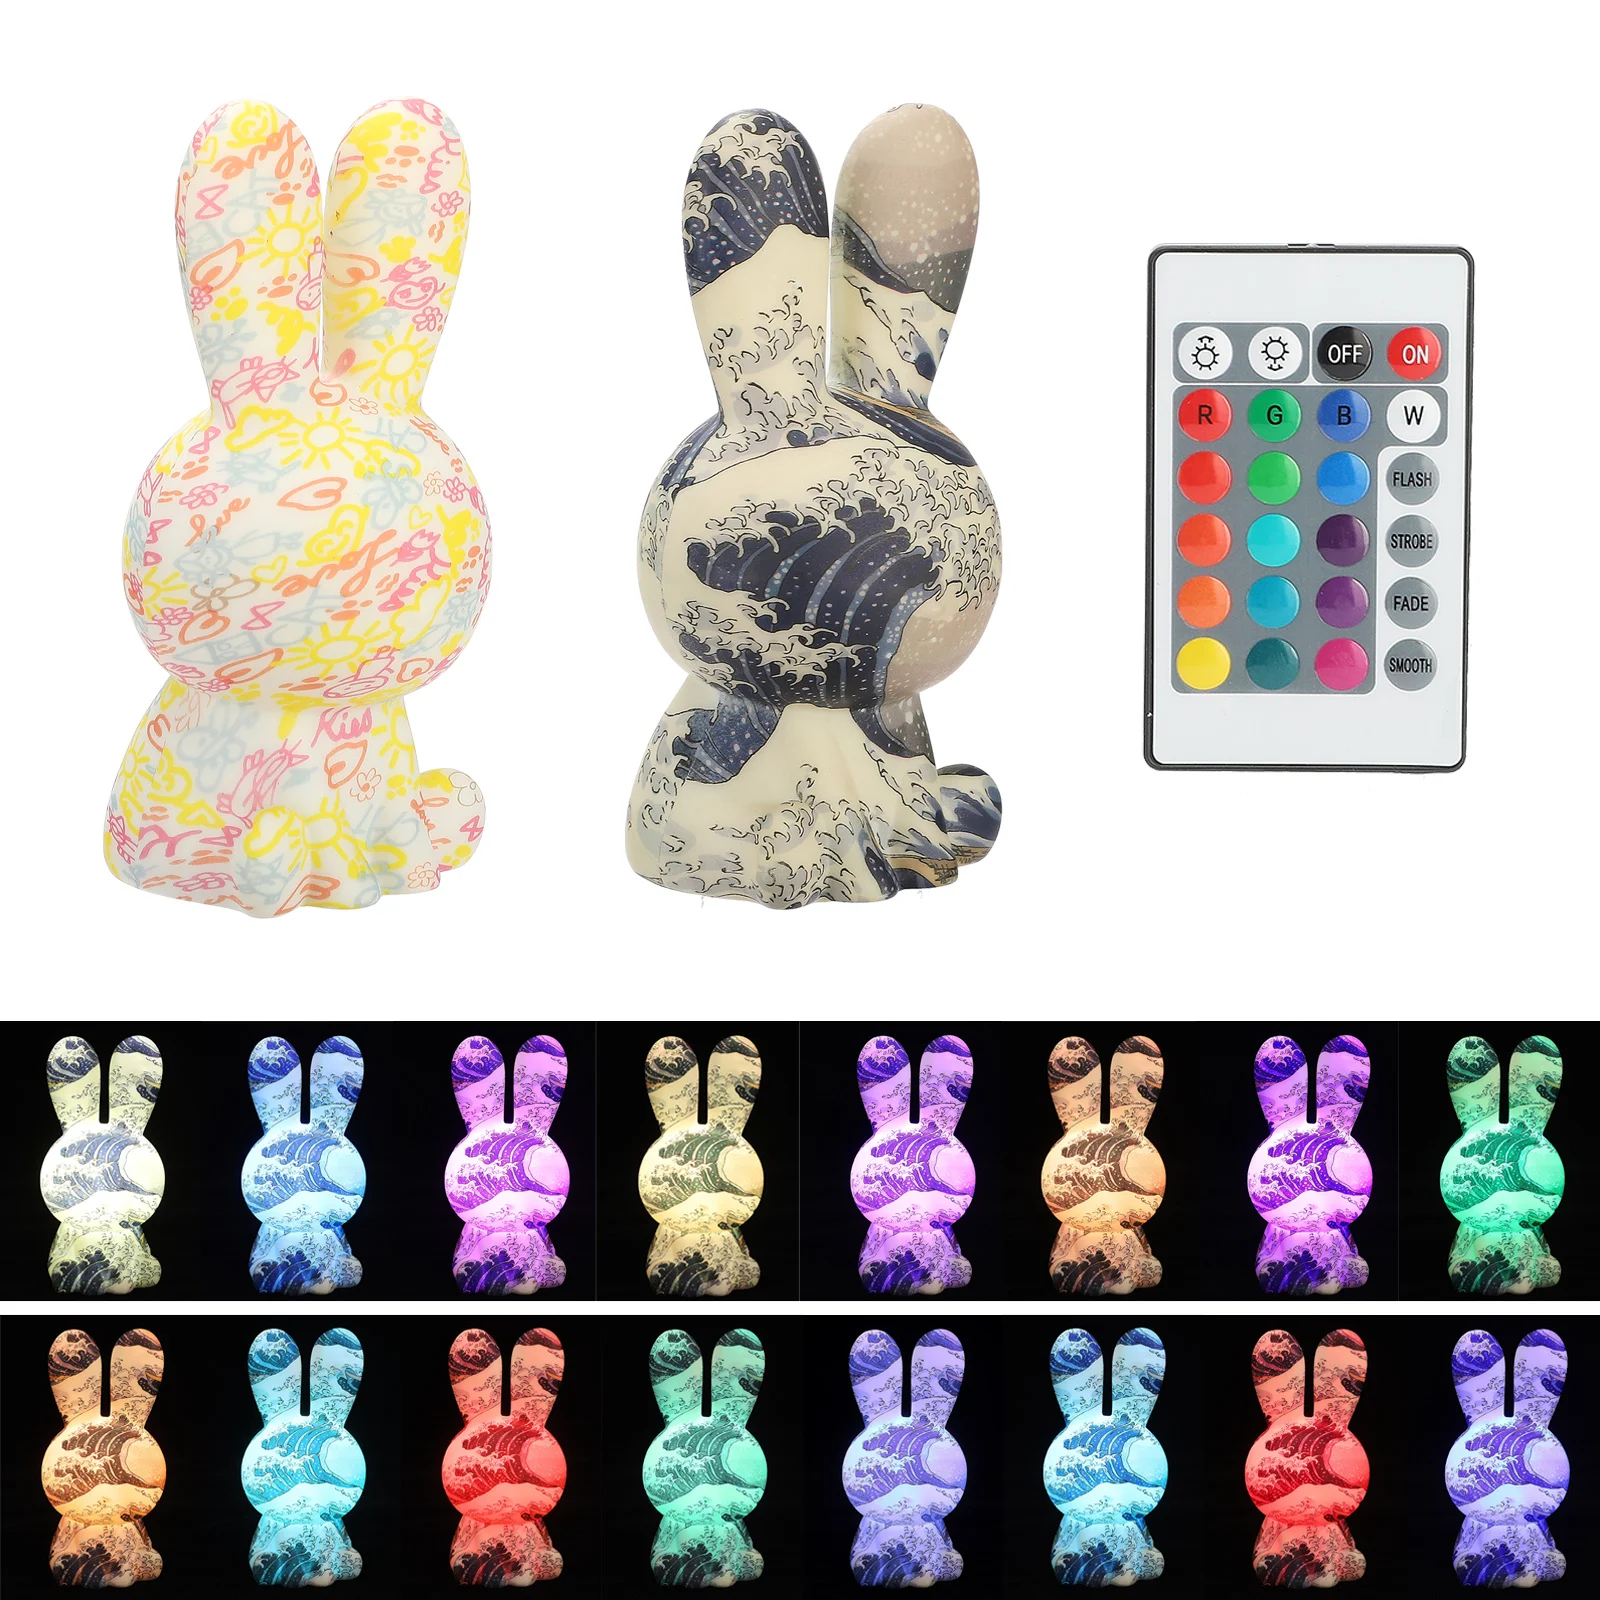 Rabbit LED Night Light Touch Sensor Remote Control 16 Colors Dimmable Timer Rechargeable Silicone Bunny Lamp for Kids Baby Gift